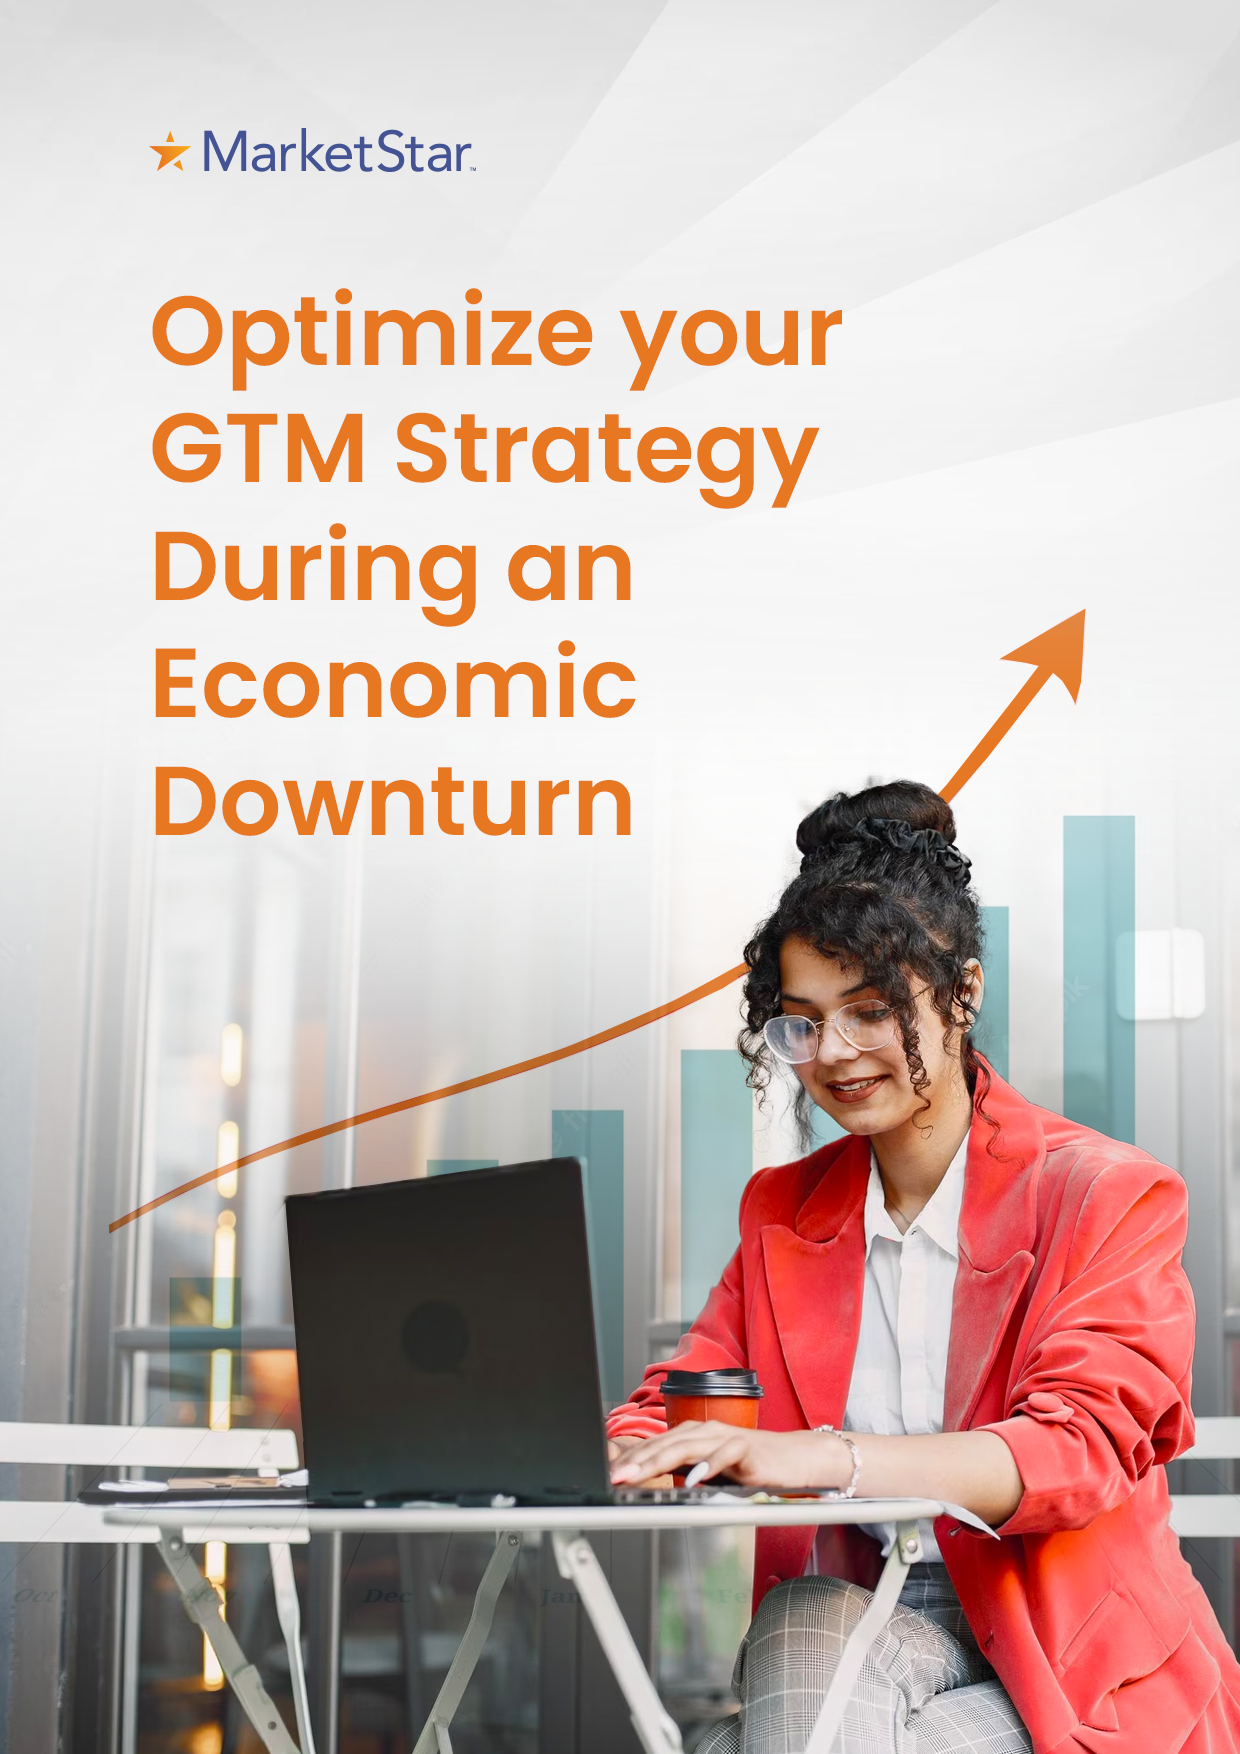 Optimize your GTM Strategy during an Economic Downturn